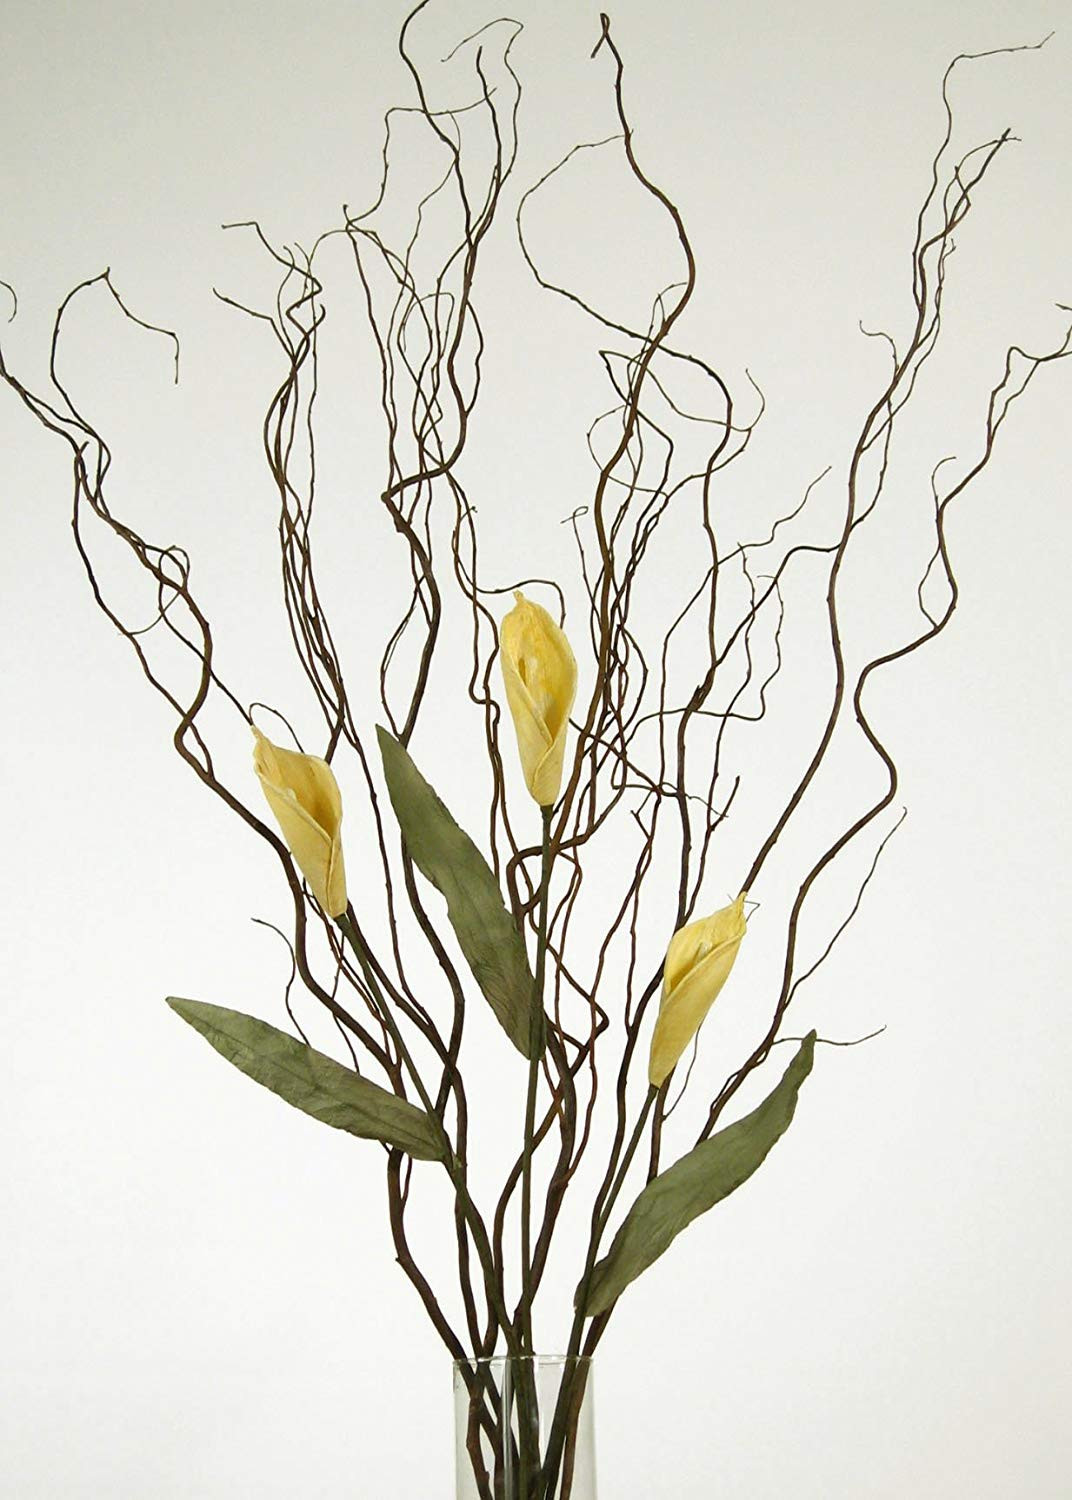 Amazon Tall Flower Vases Of Amazon Com Greenfloralcrafts Curly Willow and Yellow Calla Lilies within Amazon Com Greenfloralcrafts Curly Willow and Yellow Calla Lilies Vase Not Included Home Kitchen